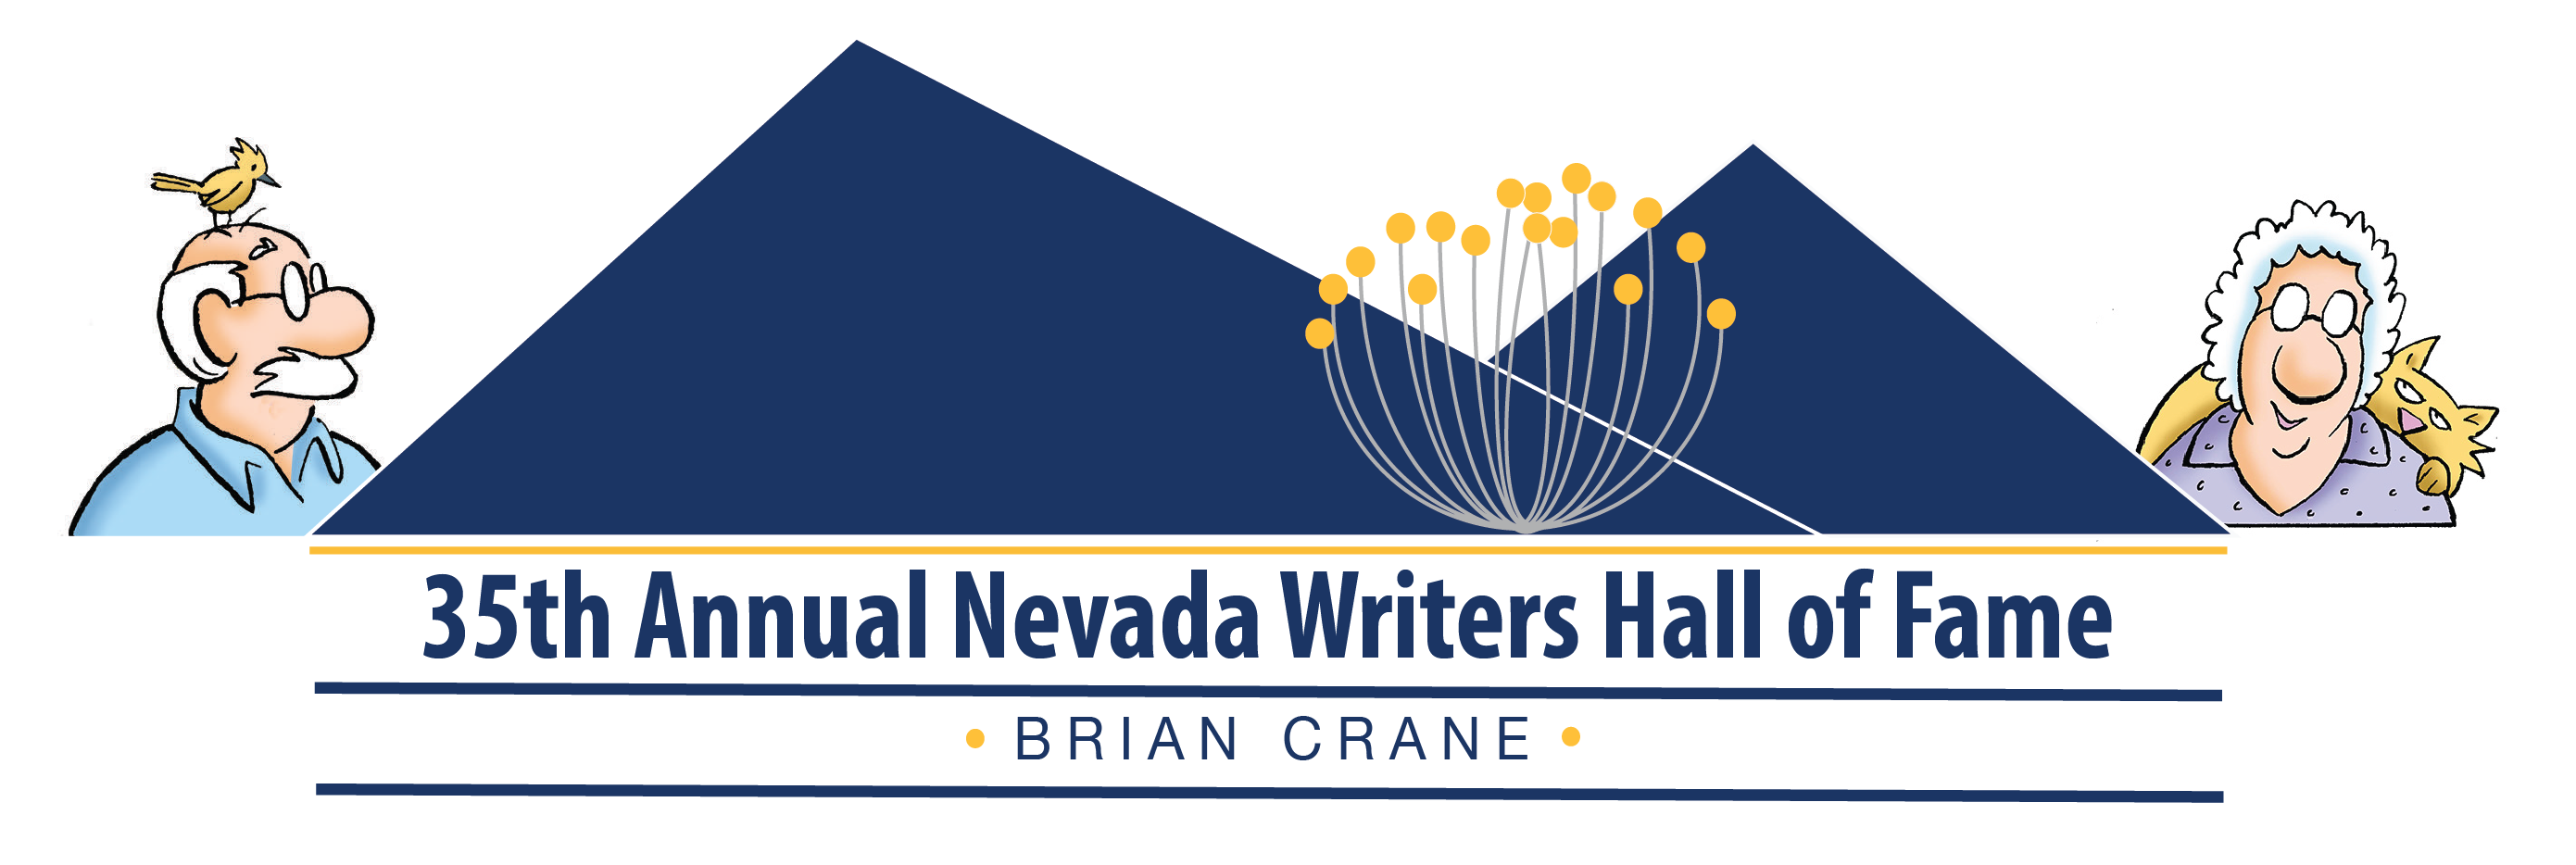 34rd Annual Nevada Writers Hall of Fame the Virtual Version logo with mountains and sagebrush